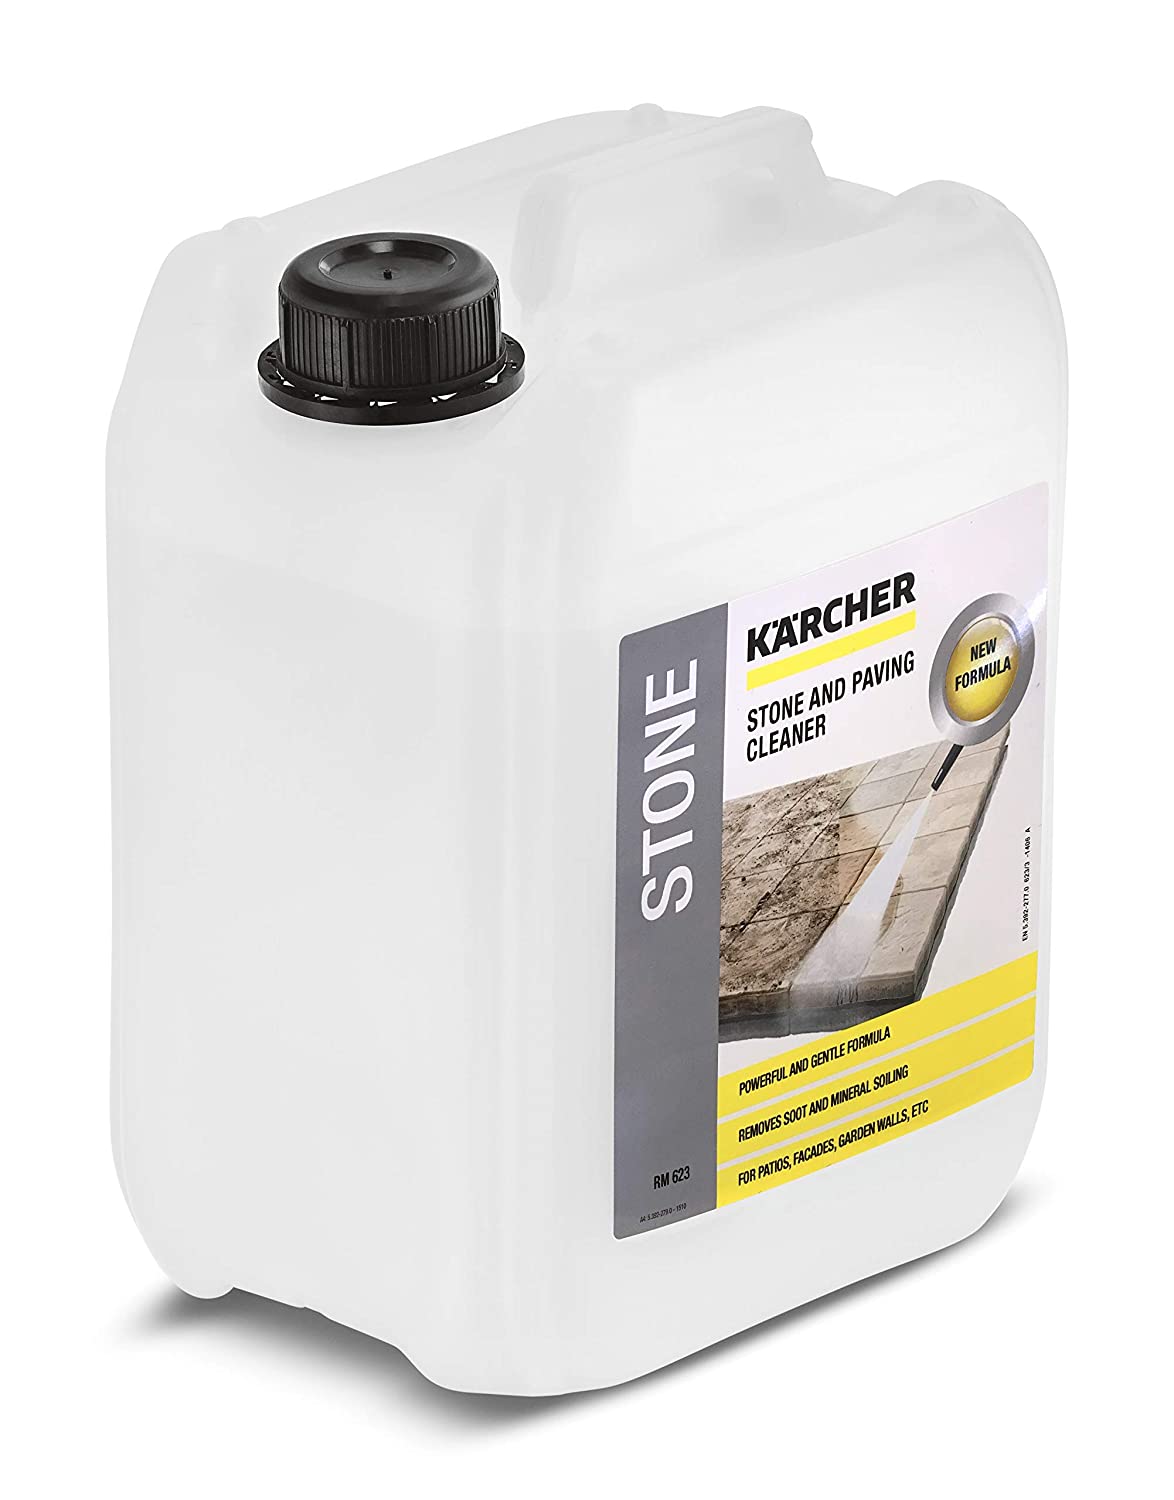 KARCHER STONE AND CLADDING CLEANER 5L